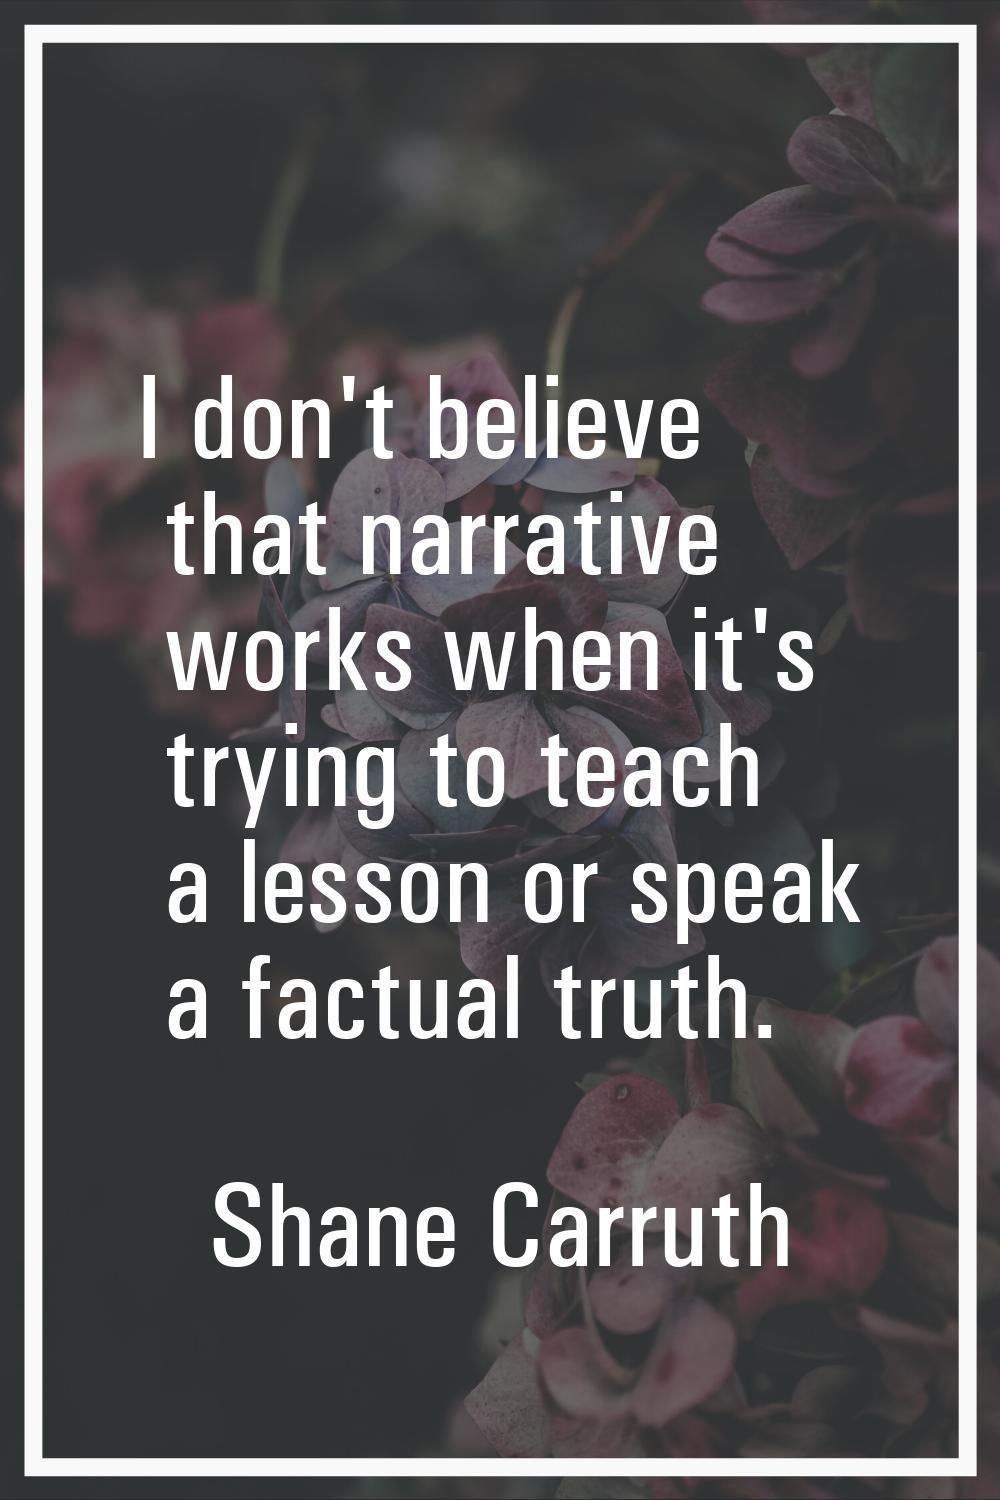 I don't believe that narrative works when it's trying to teach a lesson or speak a factual truth.